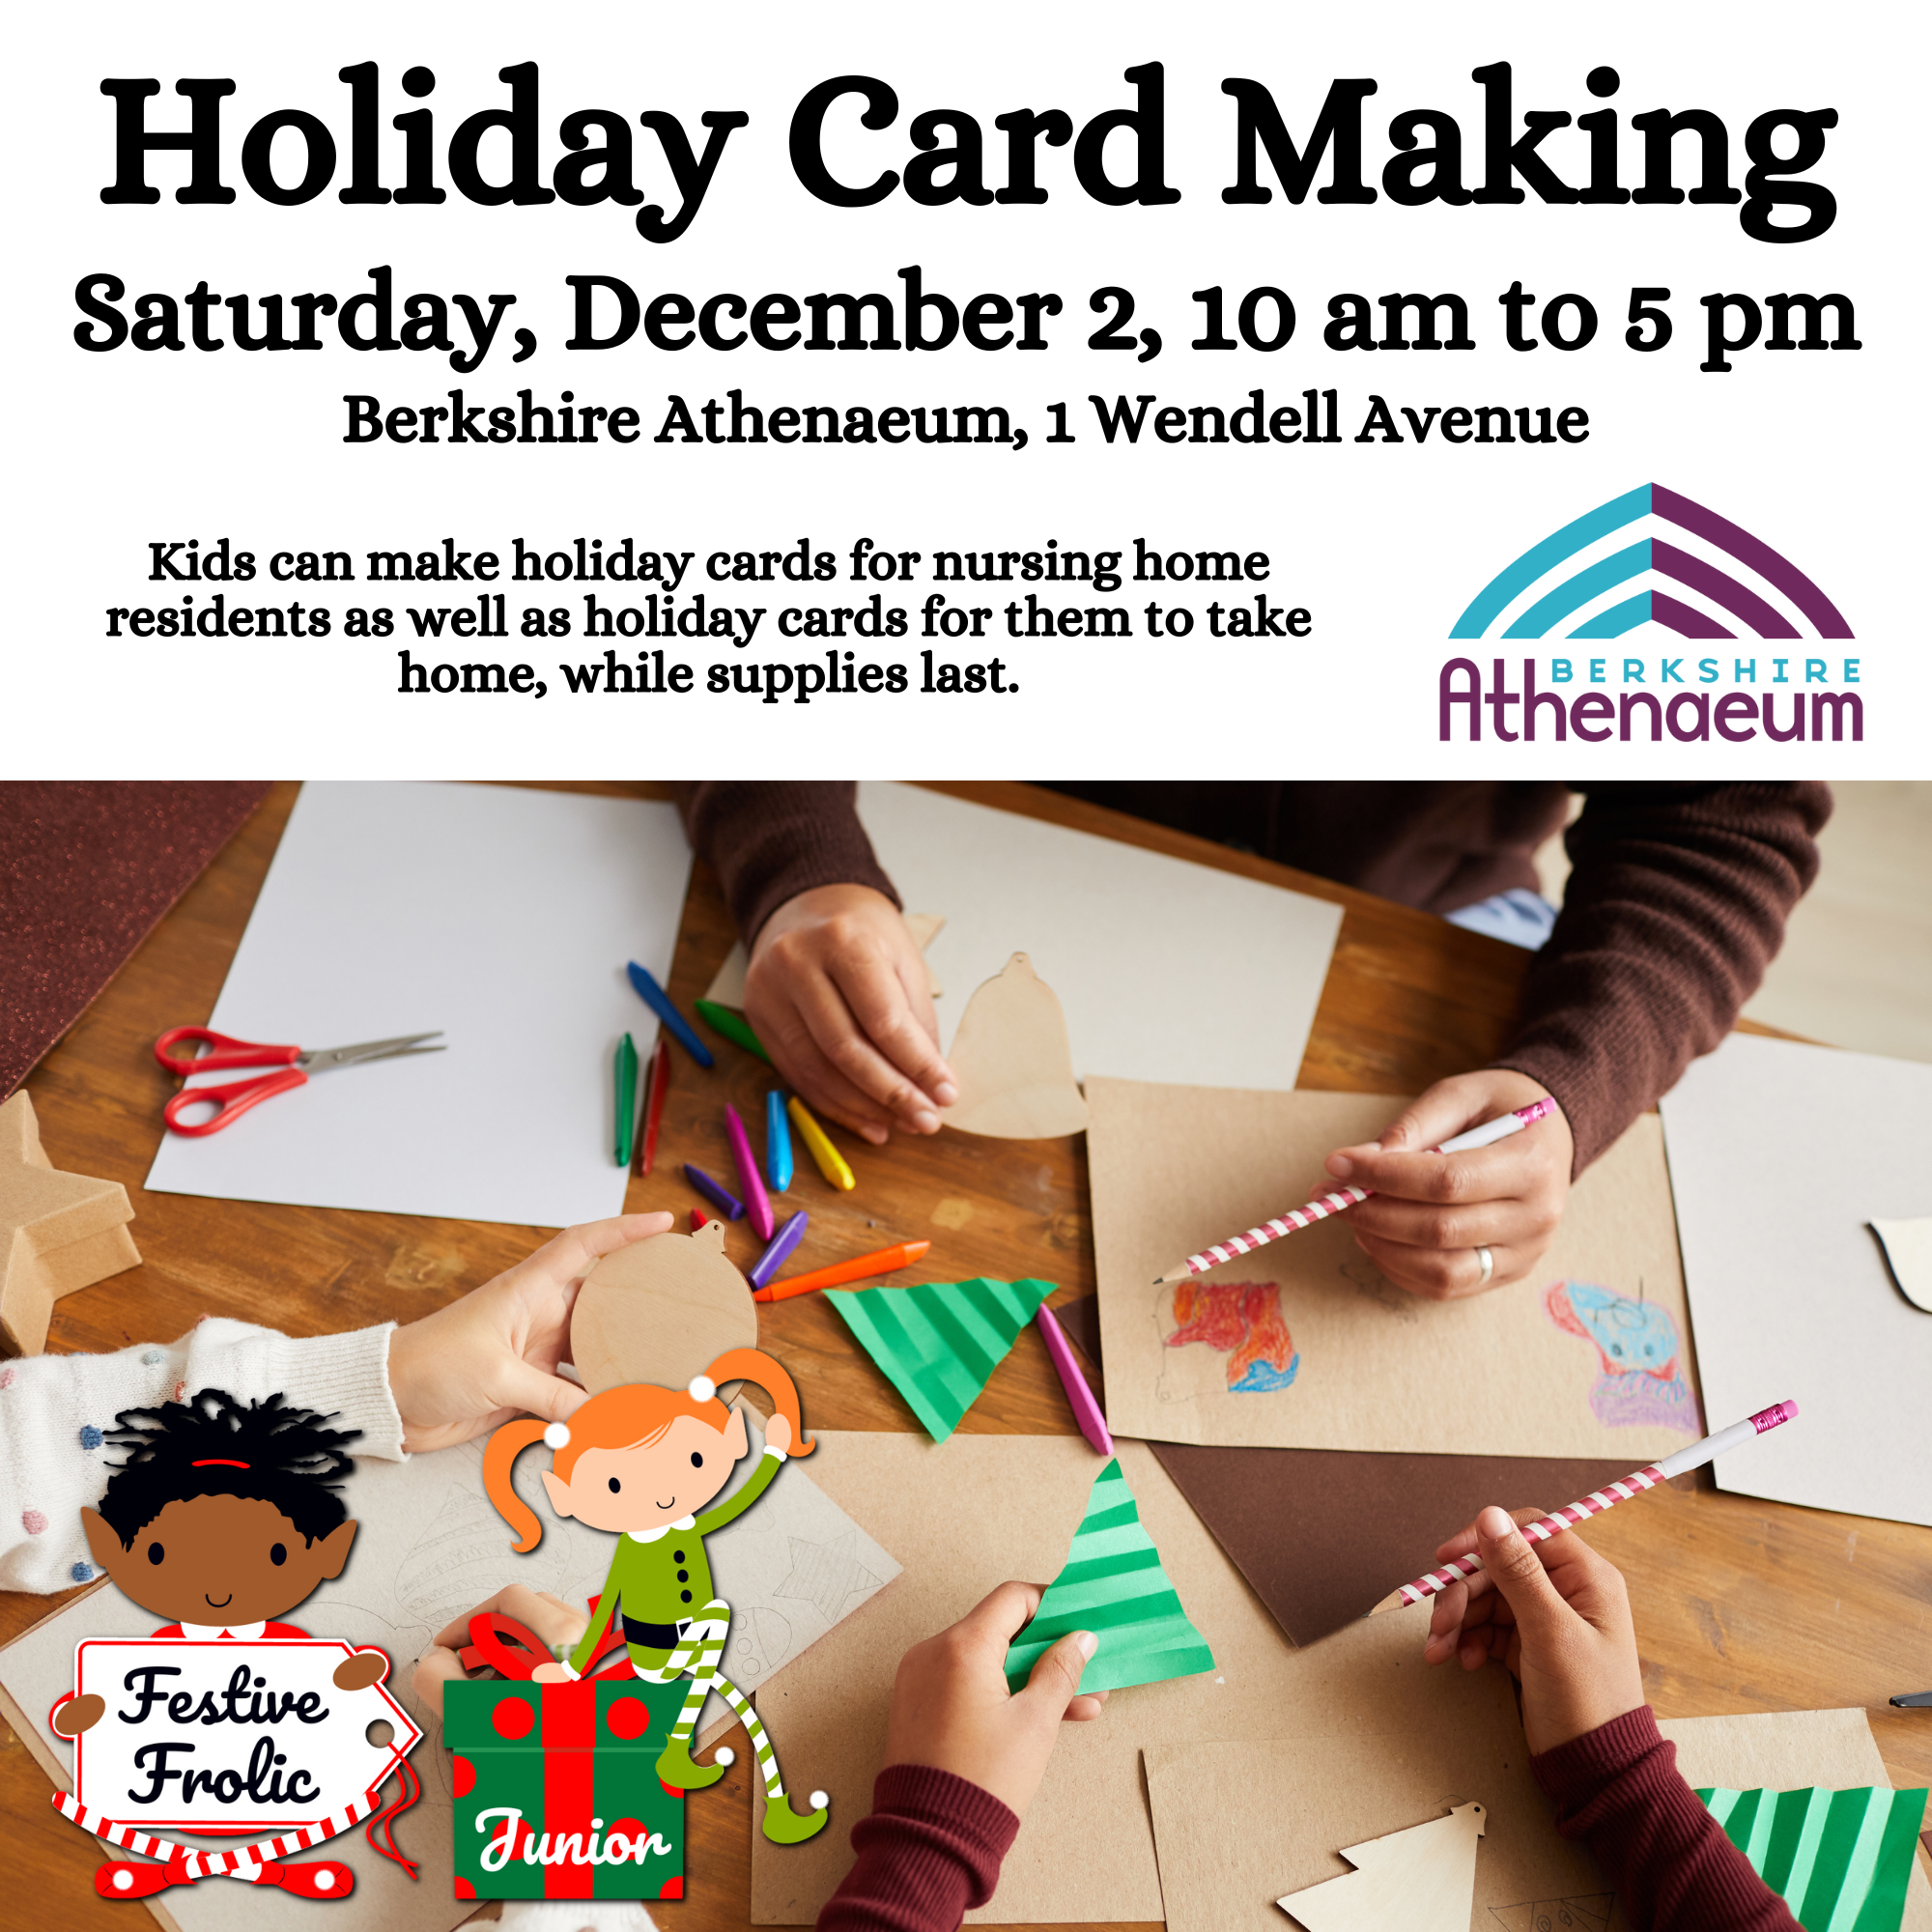 Holiday Card Making Drop-in Festive Frolic Pittsfield MA